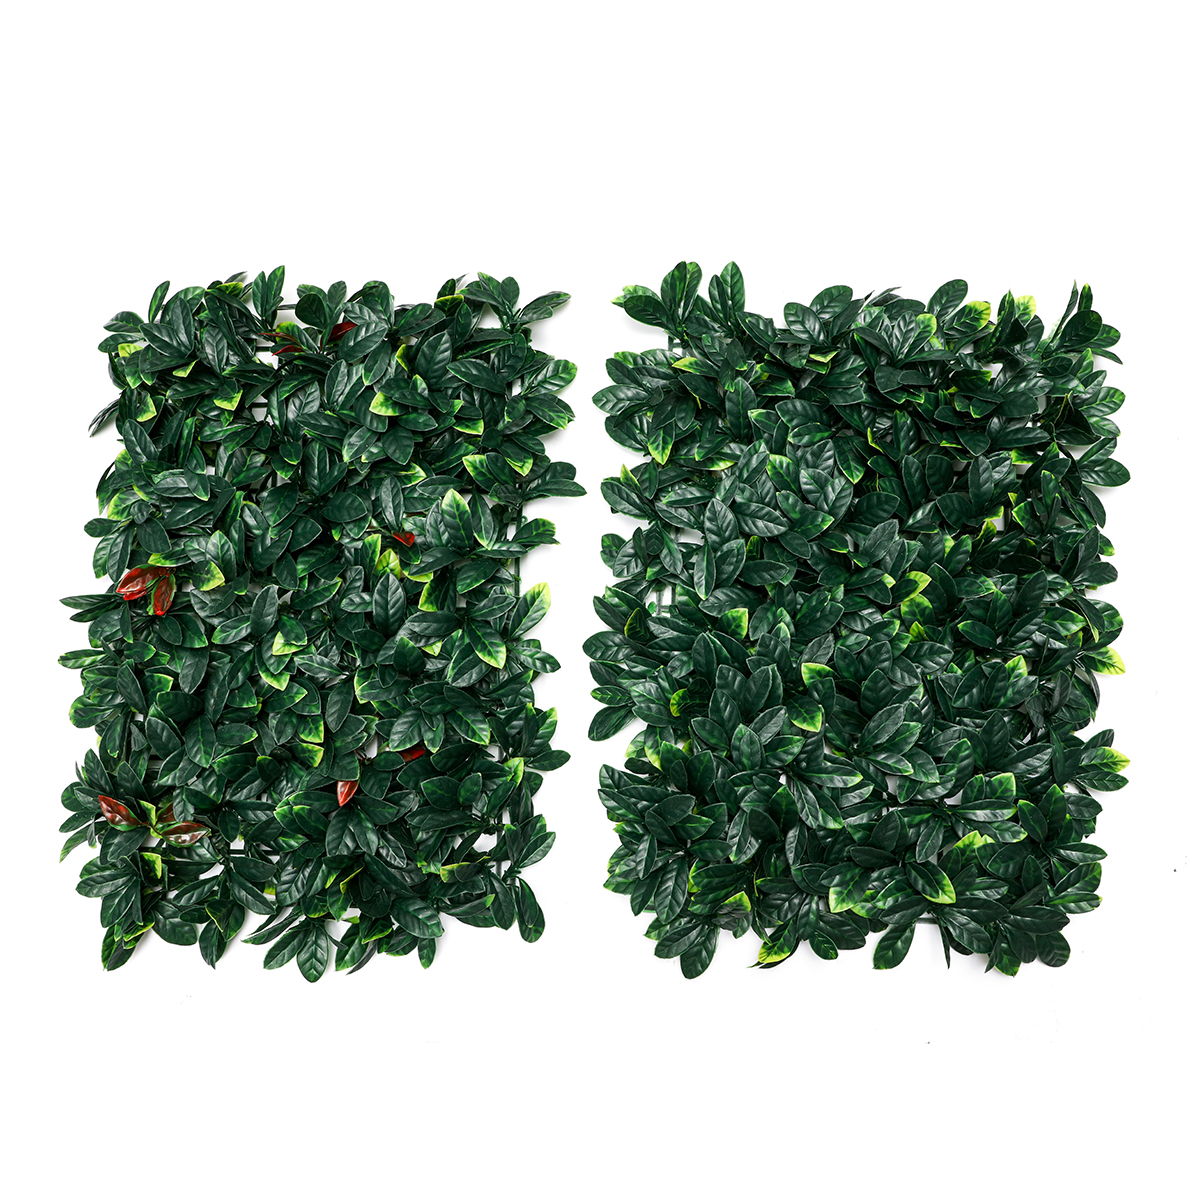 4060CM-Artificial-Topiary-Hedges-Panels-Plastic-Faux-Shrubs-Fence-Mat-Greenery-Wall-Backdrop-Decor-G-1729461-9